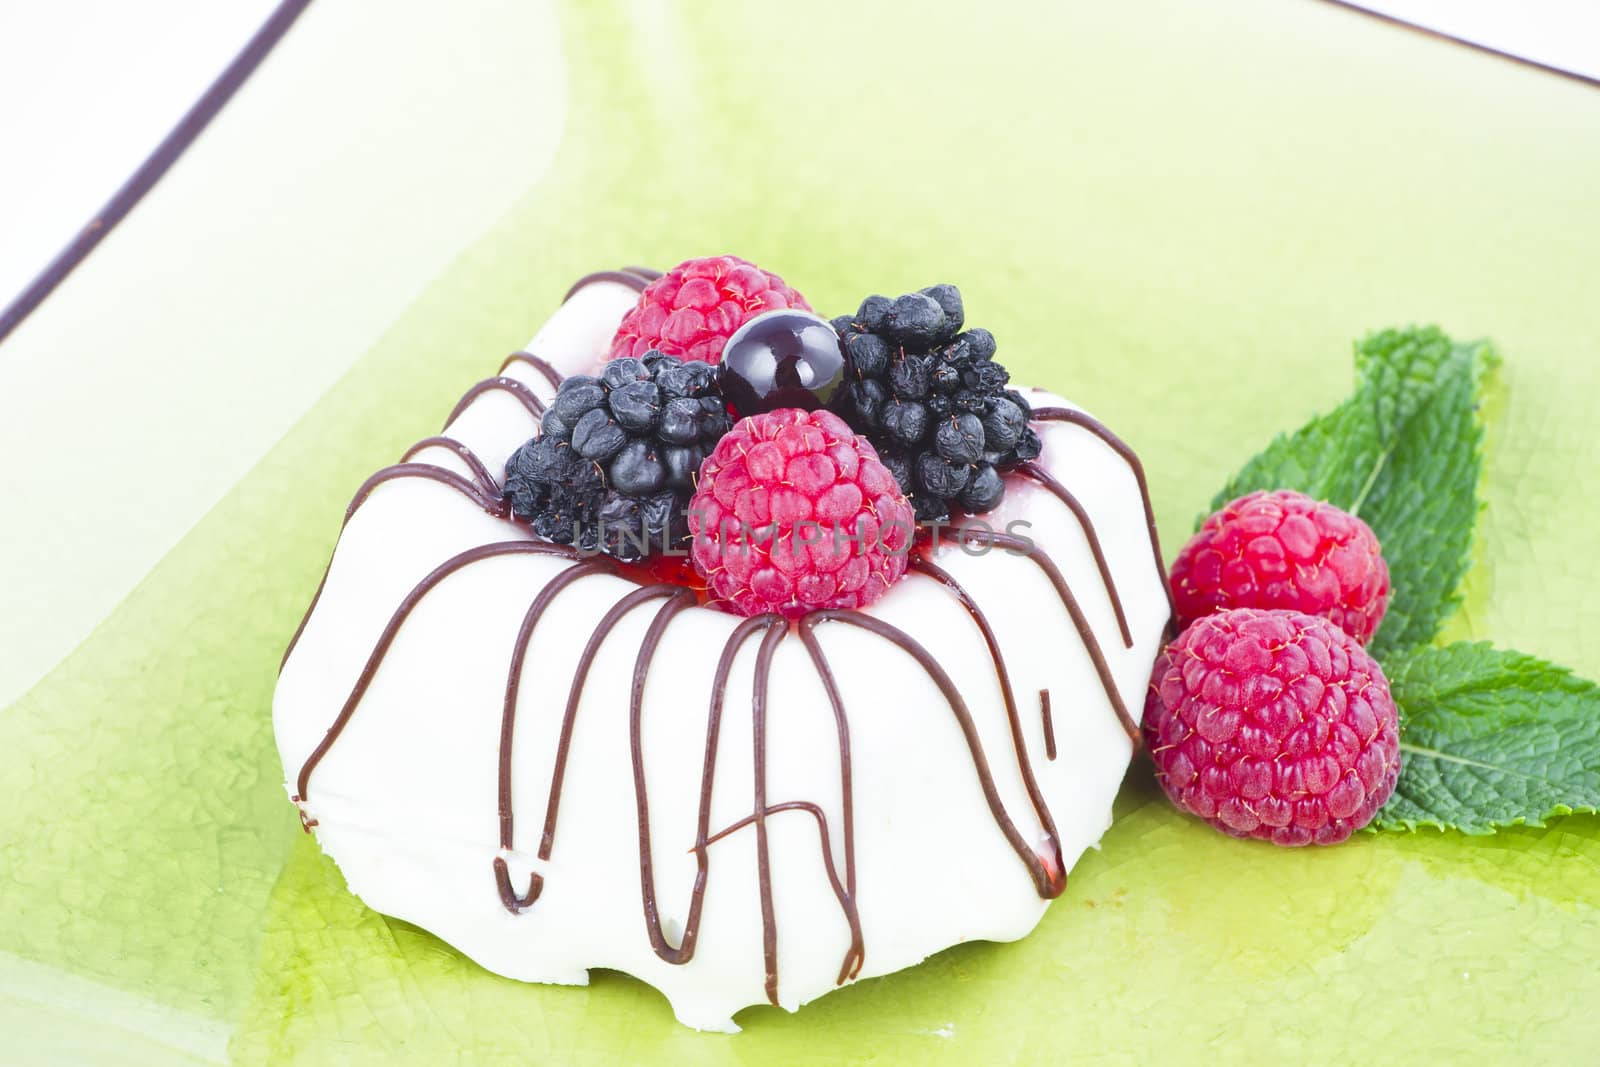 Black and White chocolate with blackberries on green plate